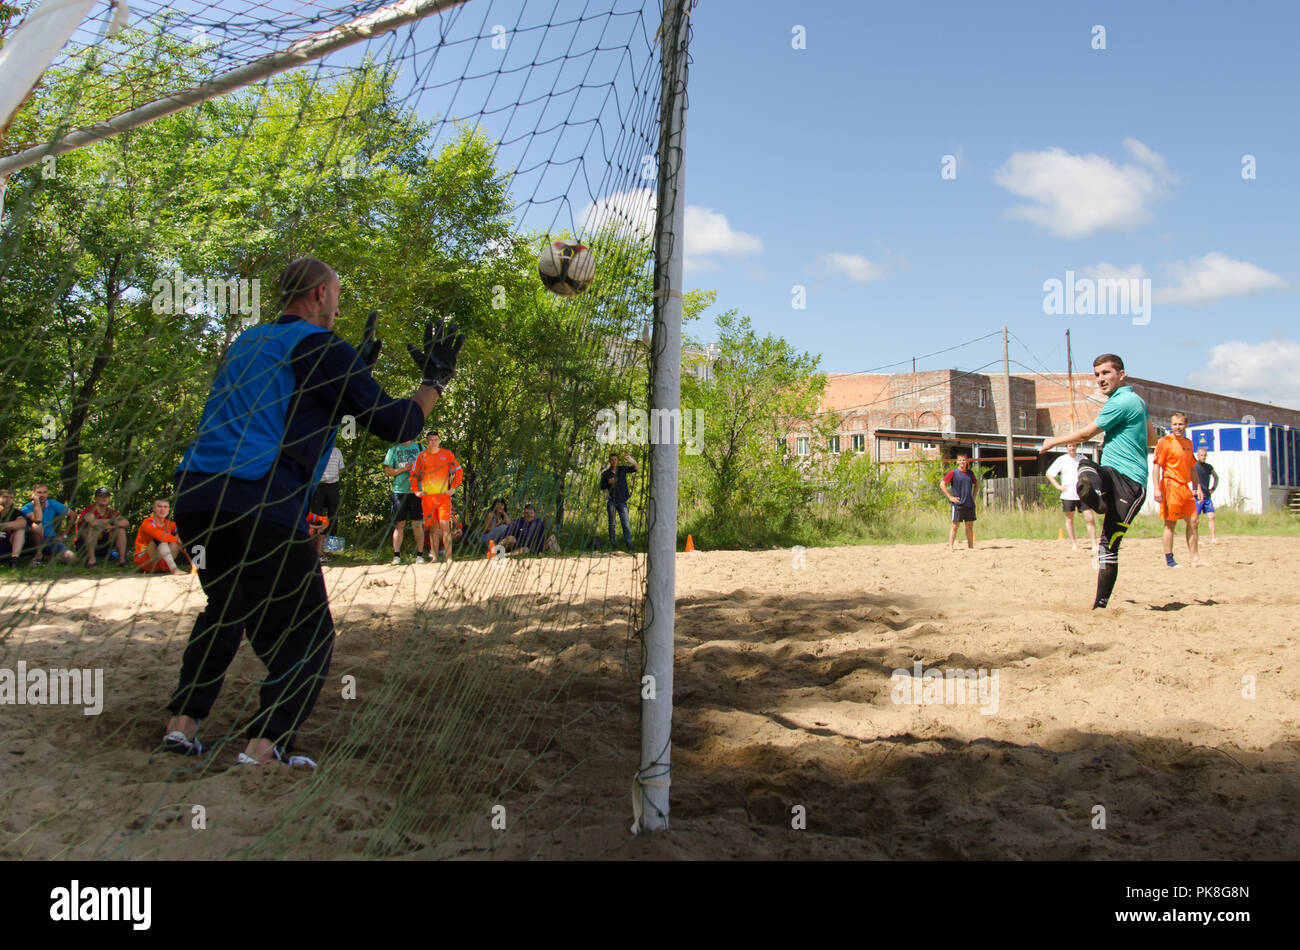 Komsomolsk-on-Amur, Russia - August 8, 2016. Public open Railroader's day. football player is on goal in amateur beach soccer championship Stock Photo